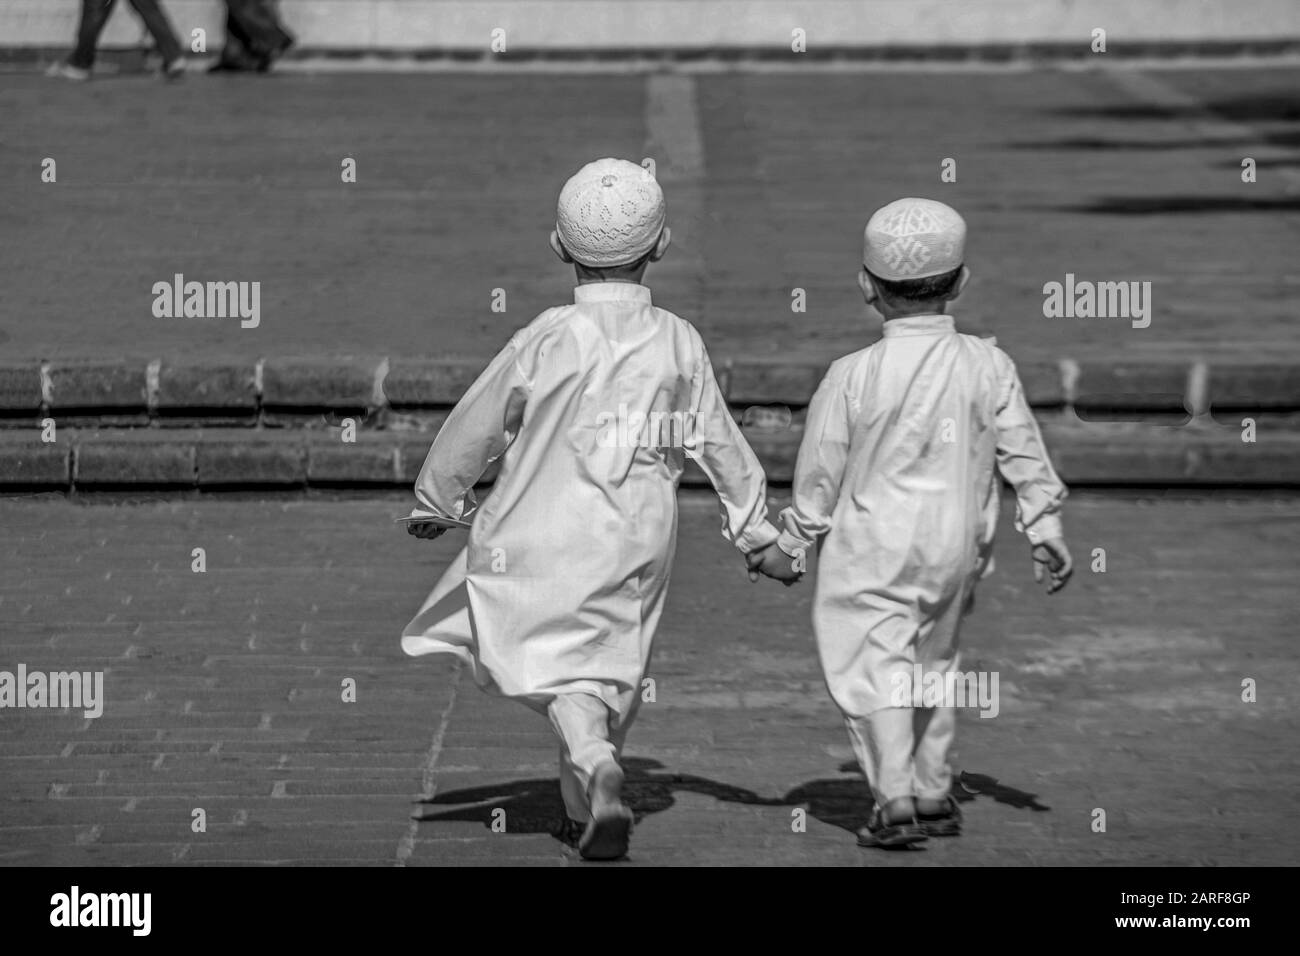 Syria, Homs, young kids going to Khaled Al-Walid mosque. Stock Photo